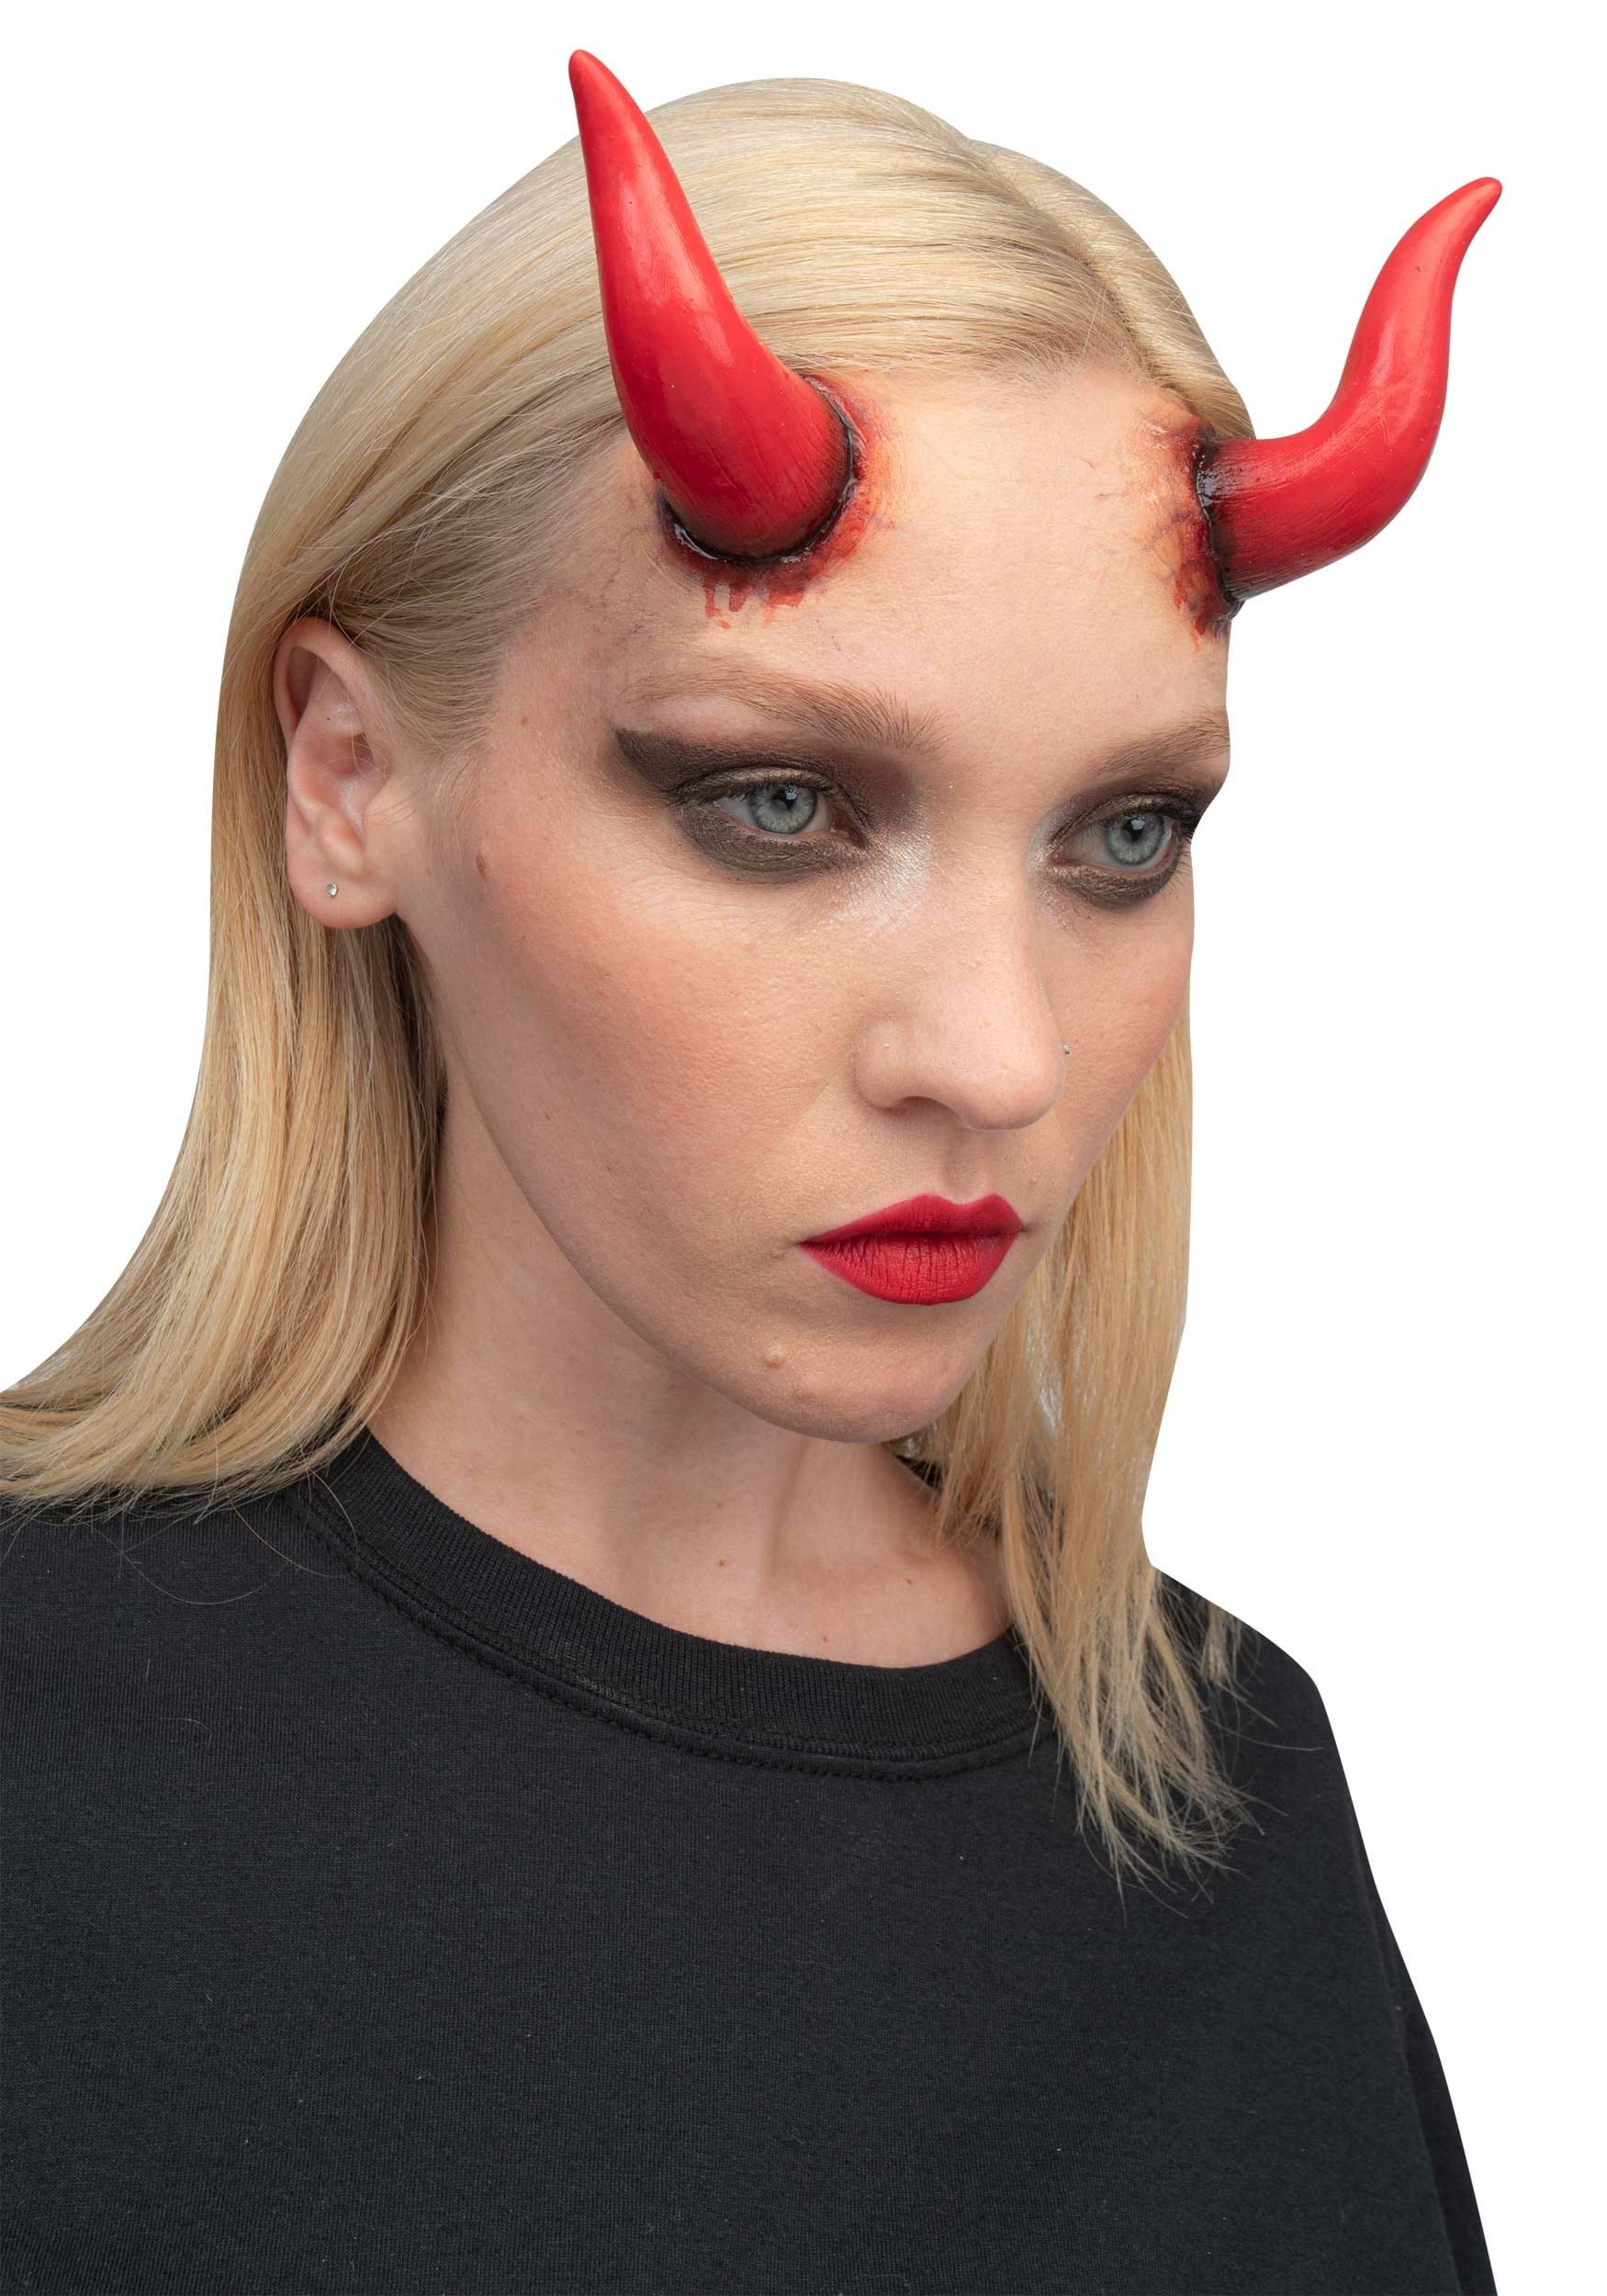 https://images.halloweencostumes.ca/products/73739/1-1/red-devil-horns-applique.jpg